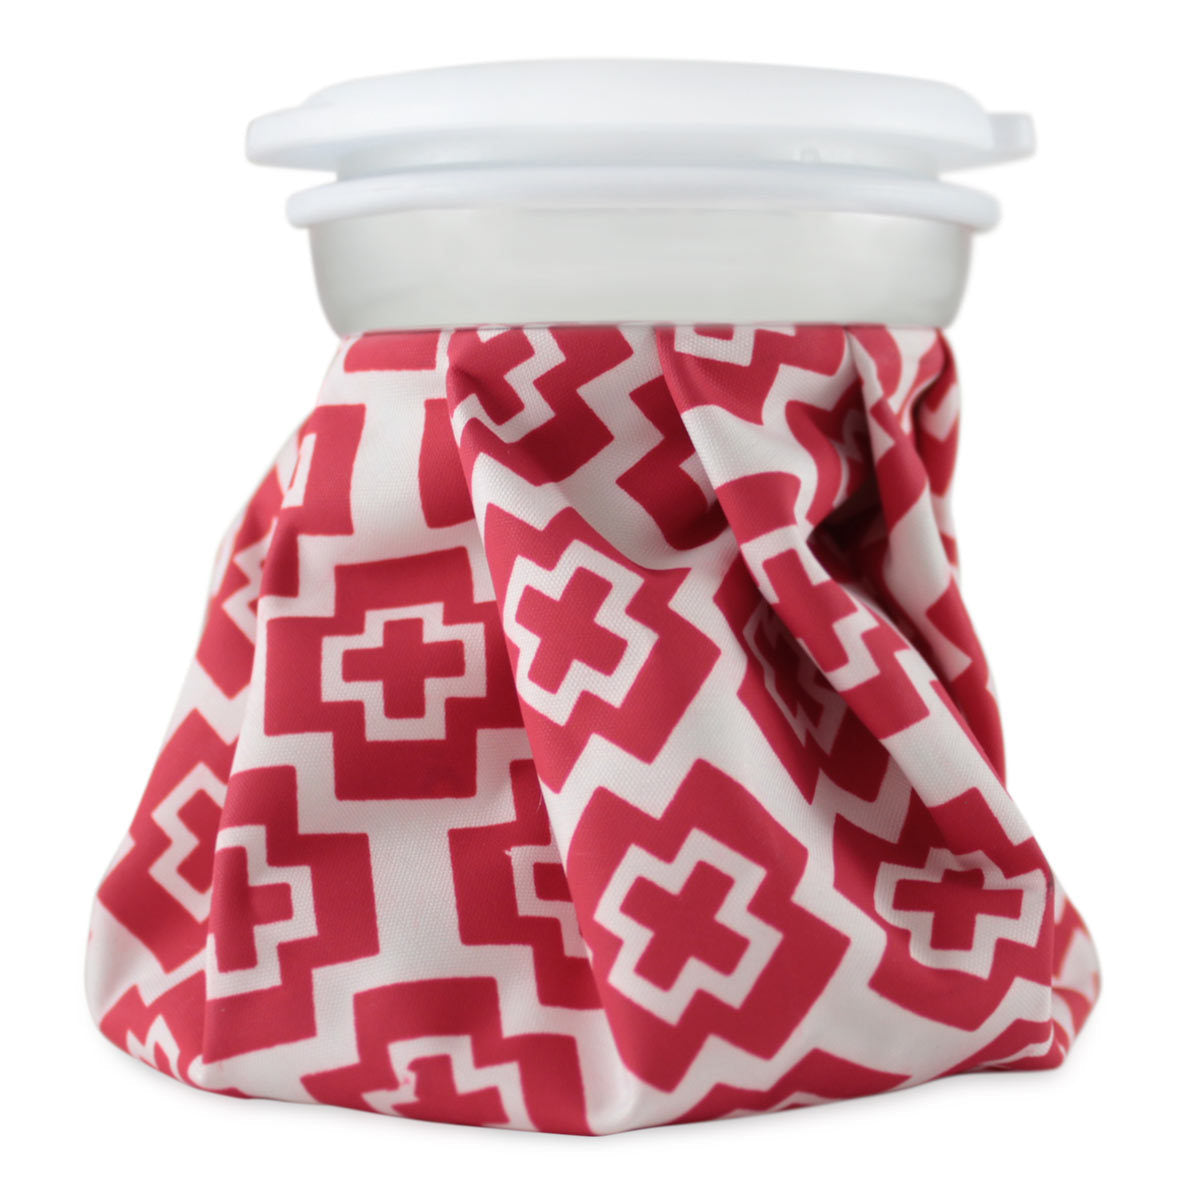 Primary image of Ice Bag - Red Crosses